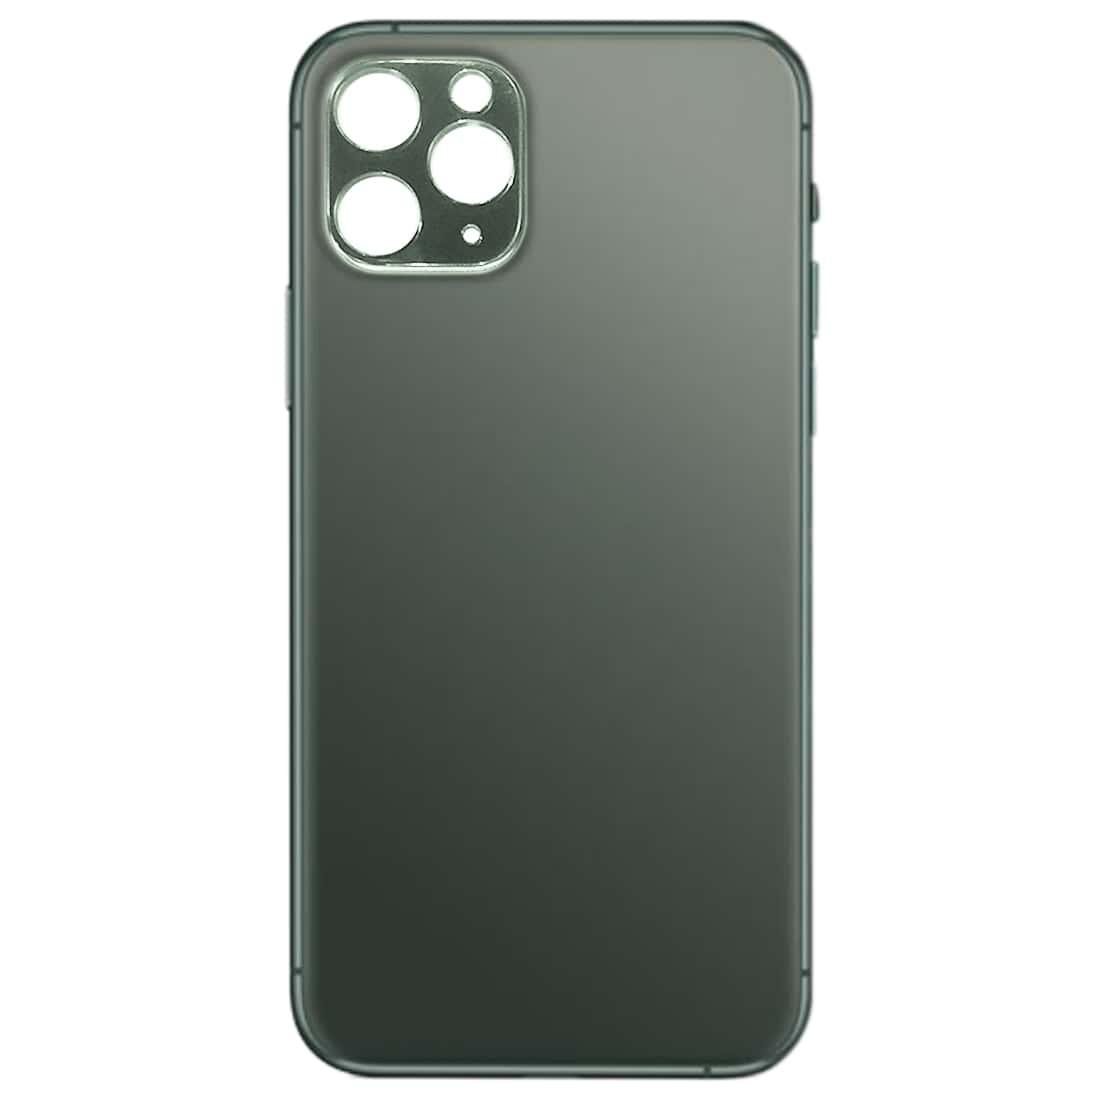 Back Glass Panel for  iPhone 11 Pro Green